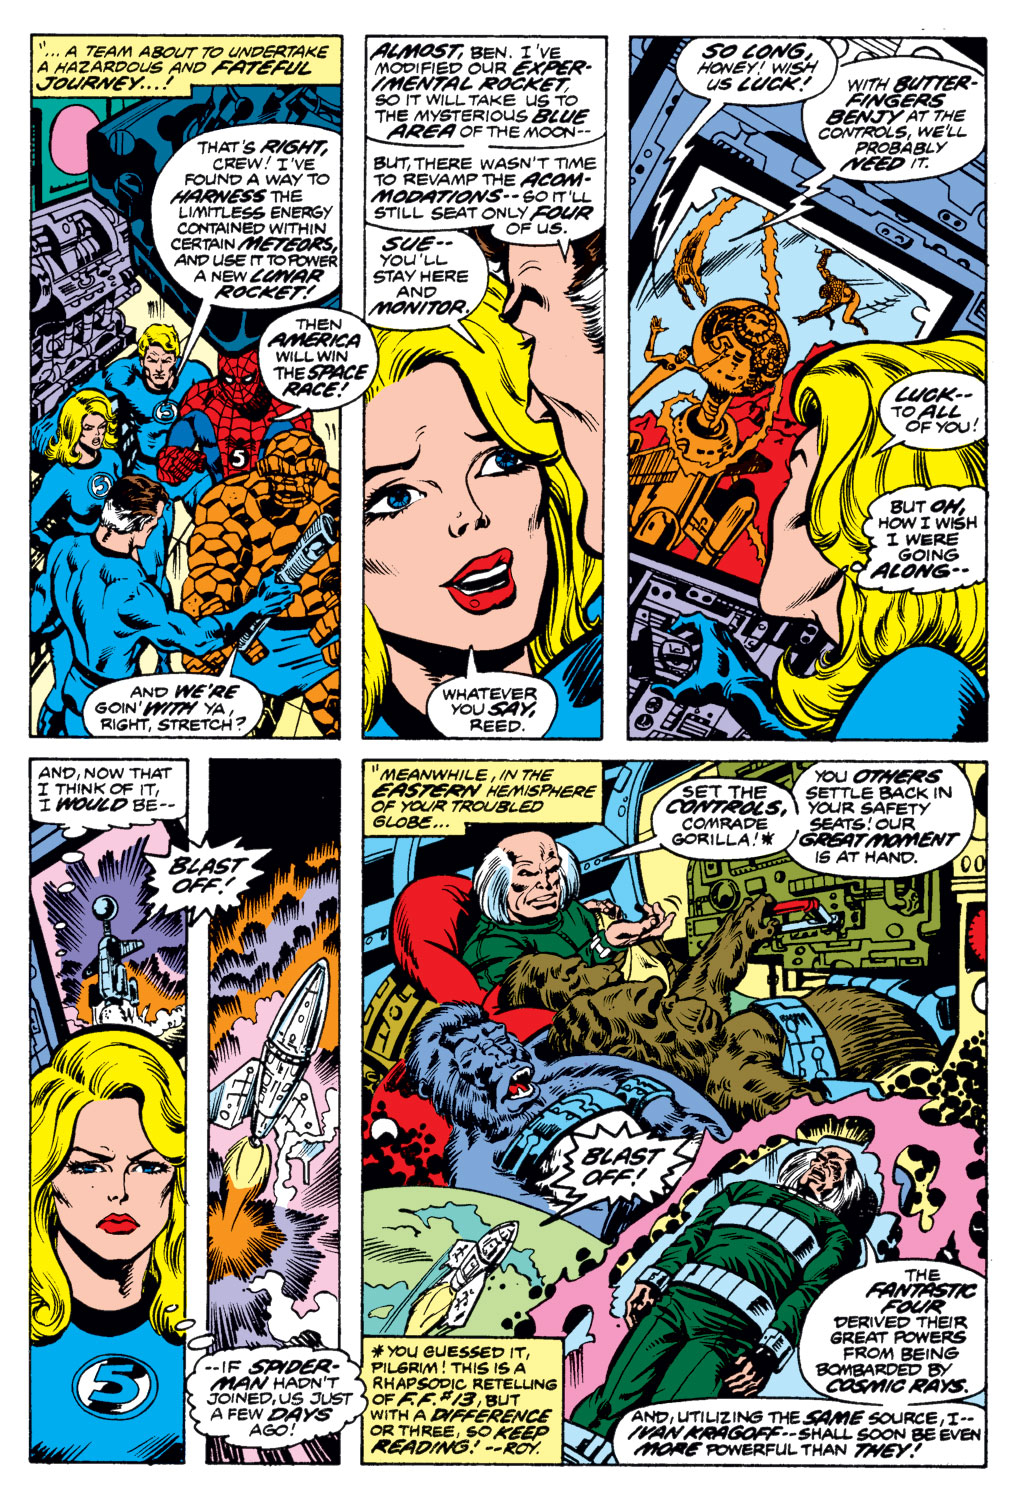 What If? (1977) issue 1 - Spider-Man joined the Fantastic Four - Page 17